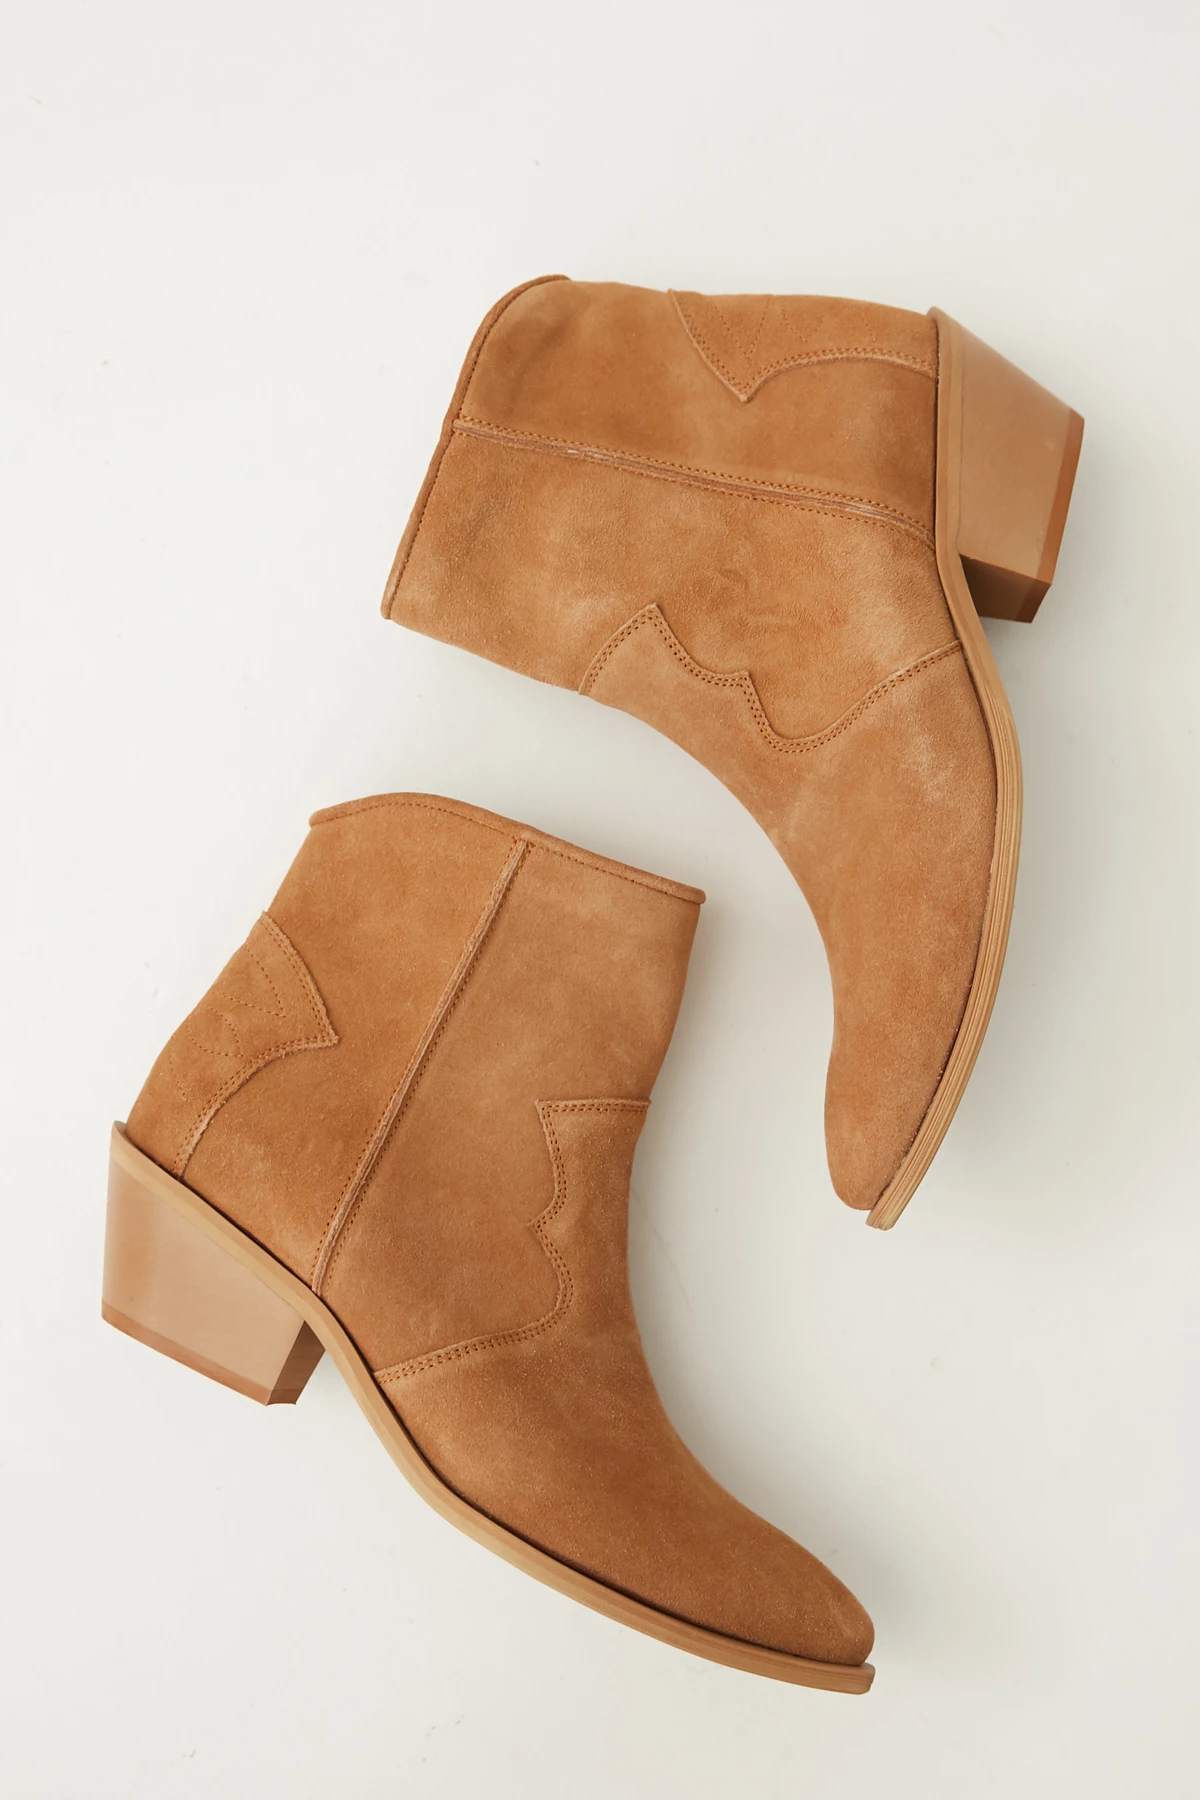 Suede camel сowboy boots, photo 4